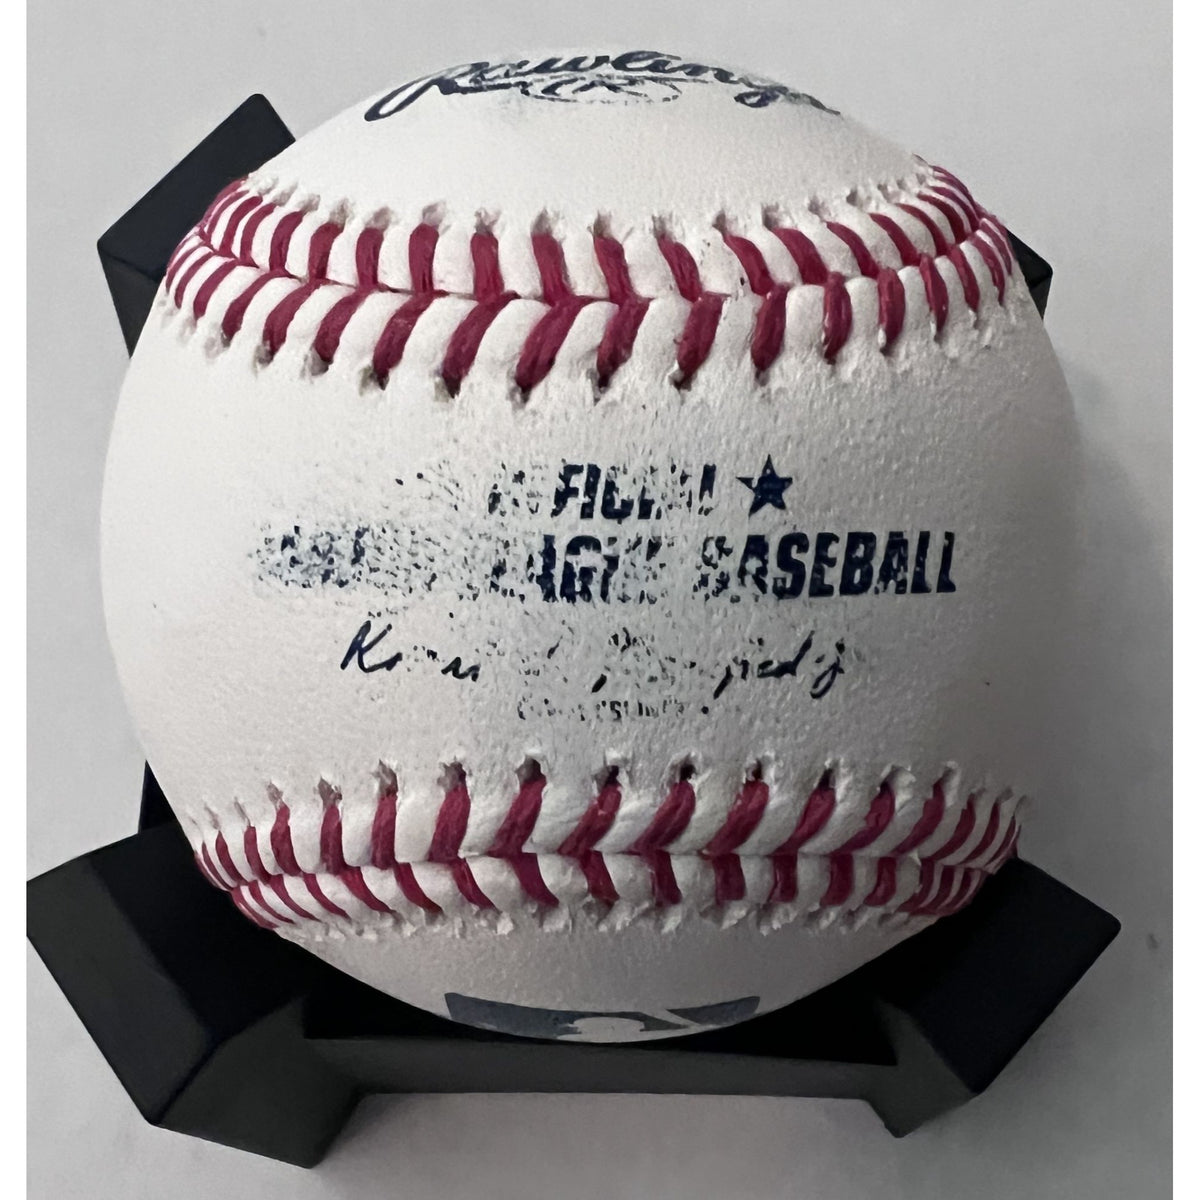 Los Angeles Dodgers Walker Bueller Clayton Kershaw Official Rawlings MLB Baseball Signed with Proof by Awesome Artifact